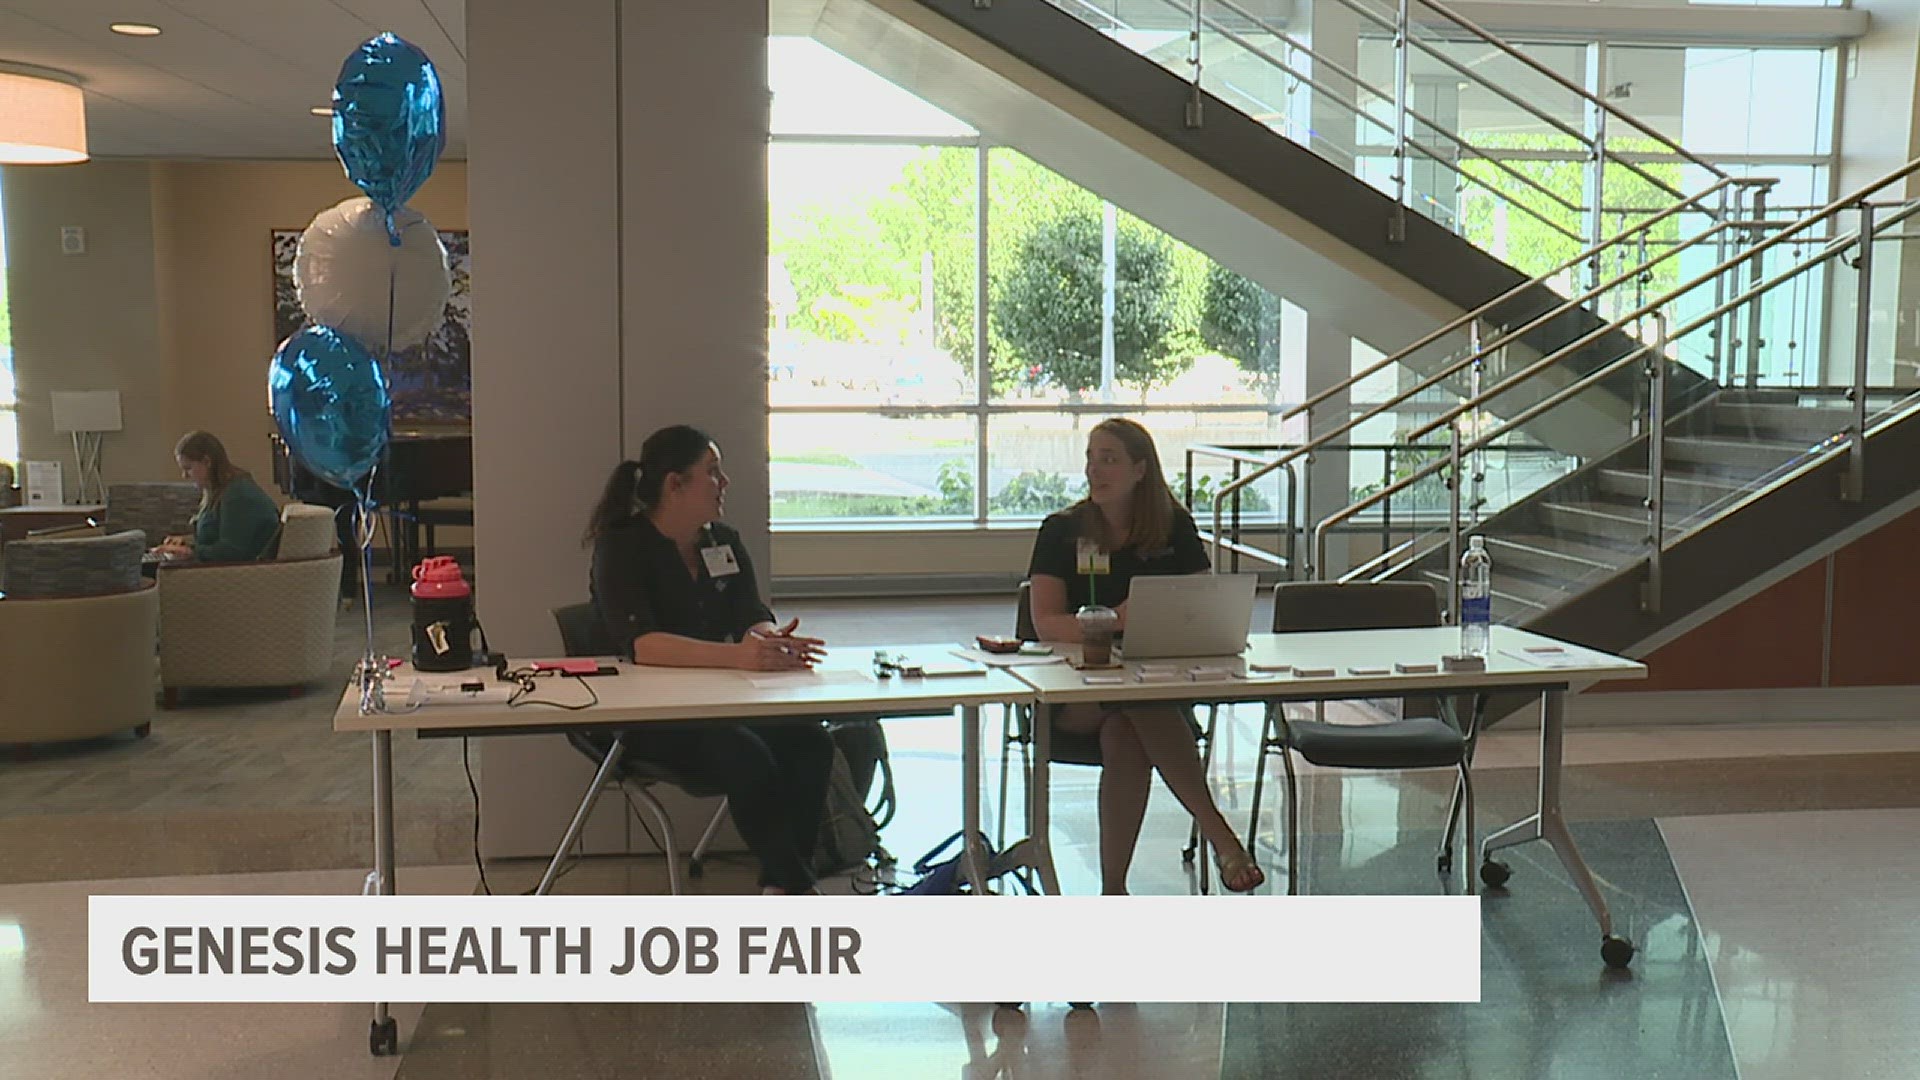 Staff said the 'direct hire' events lead to more than 70 accepted job offers since February.